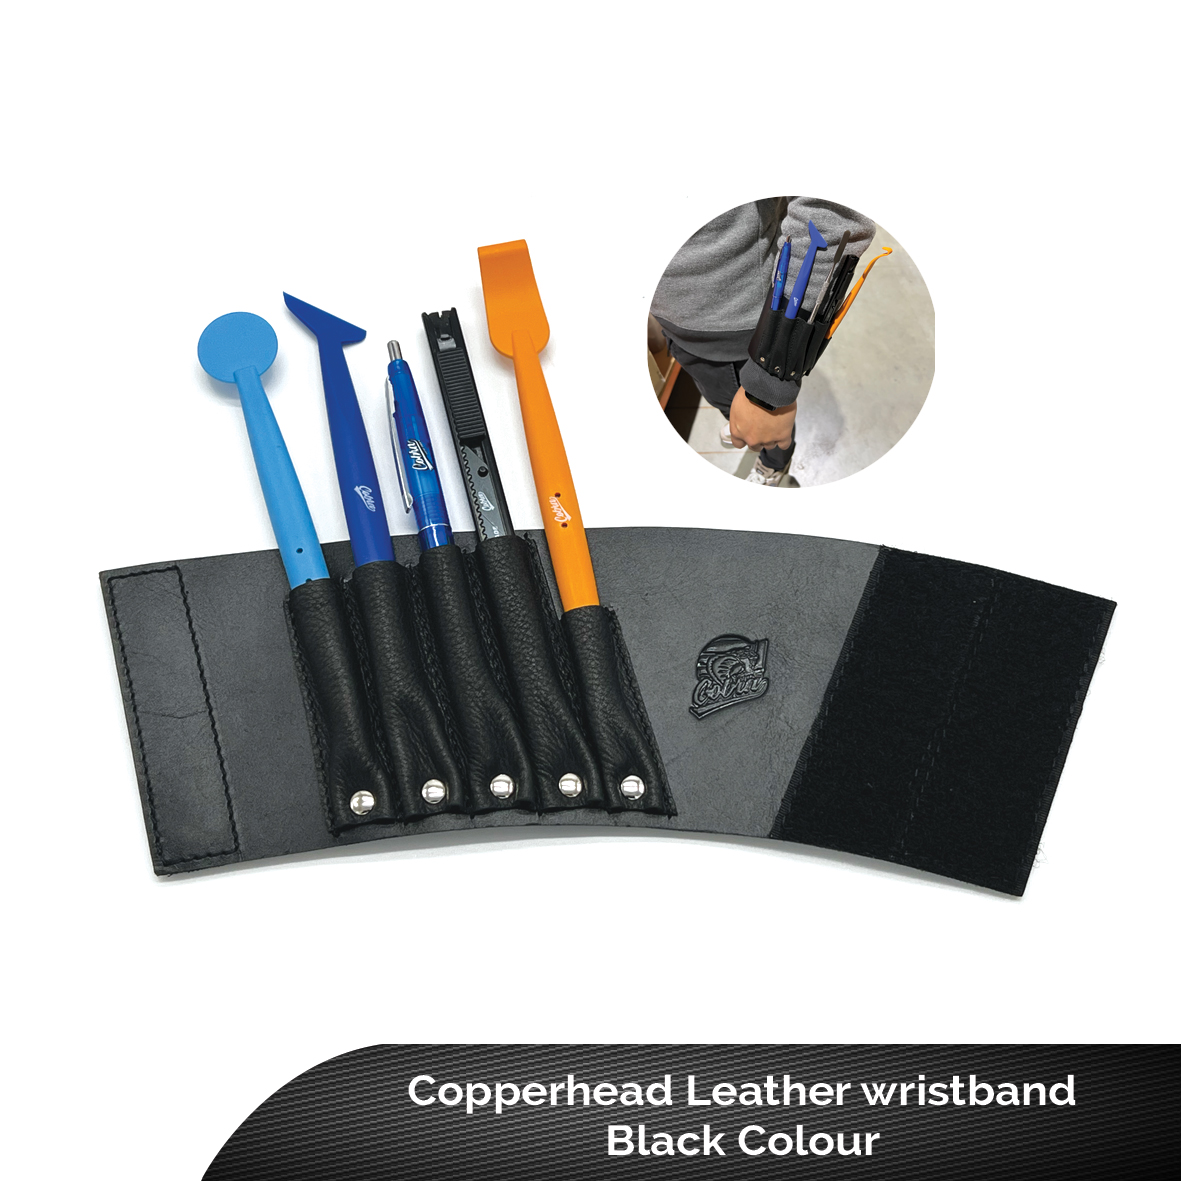 Copperhead Leather Wristband - Black Colour - RT Media Solutions